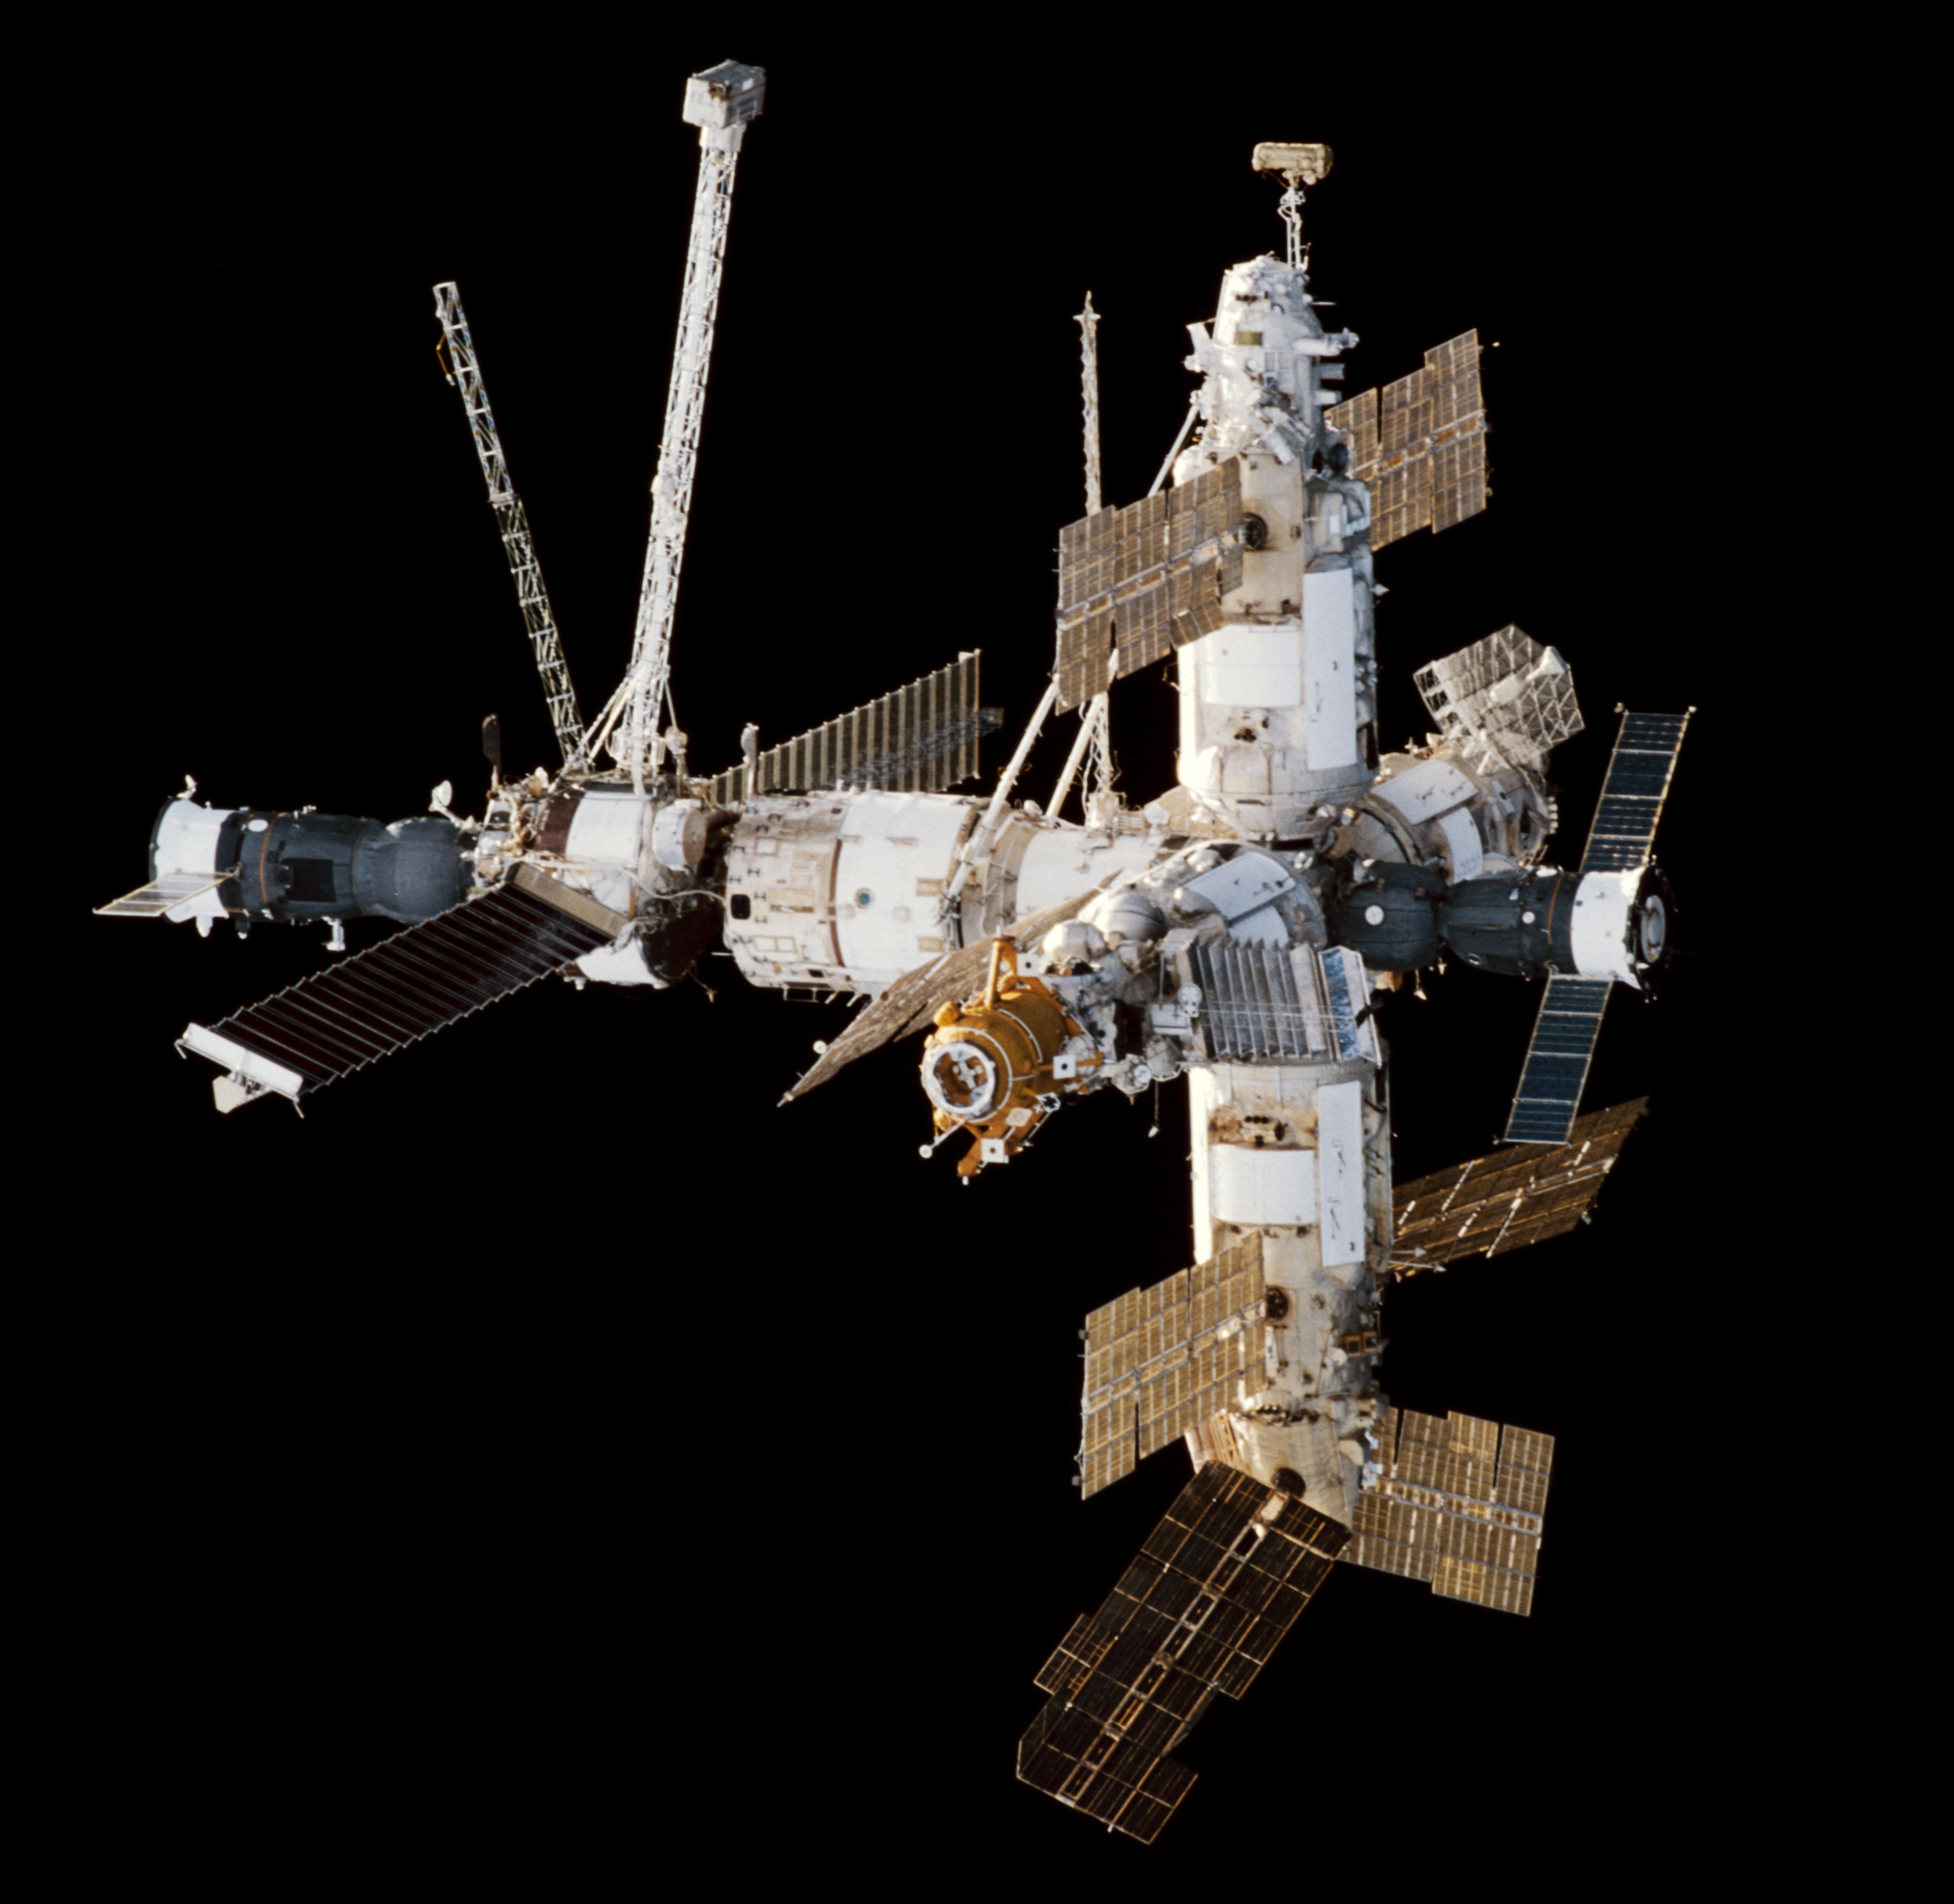 http://upload.wikimedia.org/wikipedia/commons/0/09/Mir_Space_Station_viewed_from_Endeavour_during_STS-89.jpg?uselang=ru